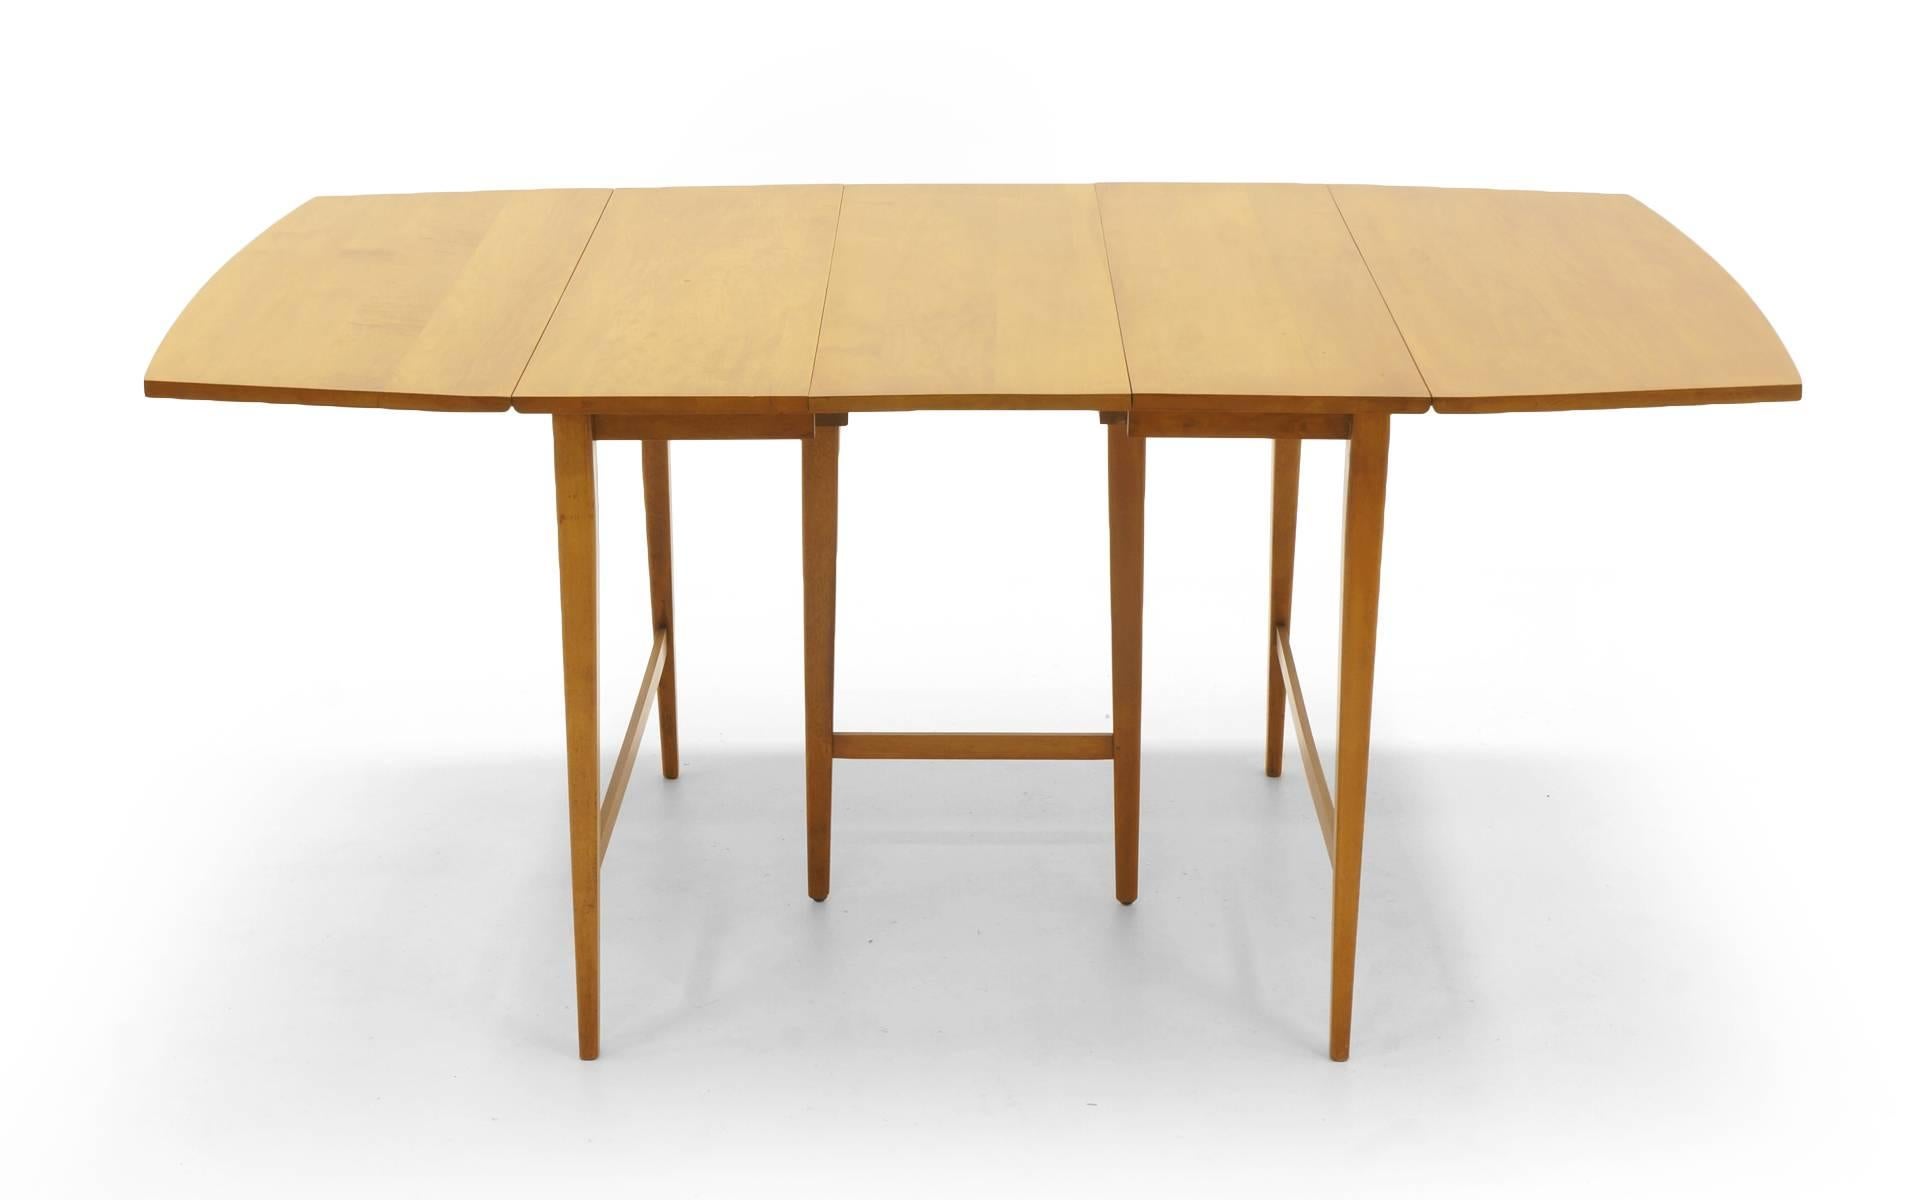 Mid-20th Century Drop-Leaf Dining Table by Paul McCobb, Expandable with Three Leaves, Solid Maple